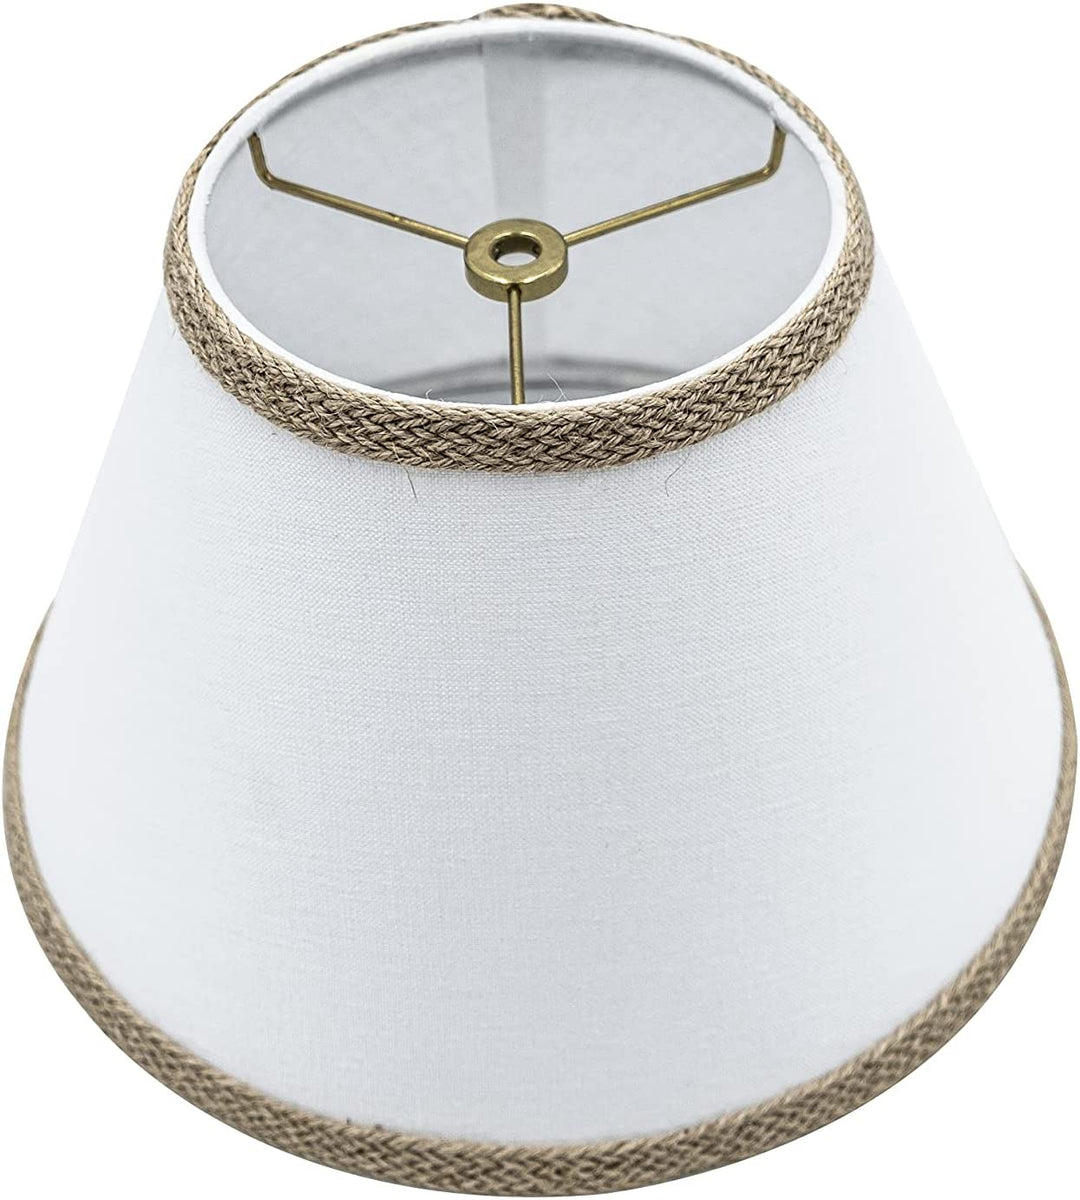 Off White Linen with Braided Burlap Trim 12 Inch Lamp Shade (Matching Harp and Finial)